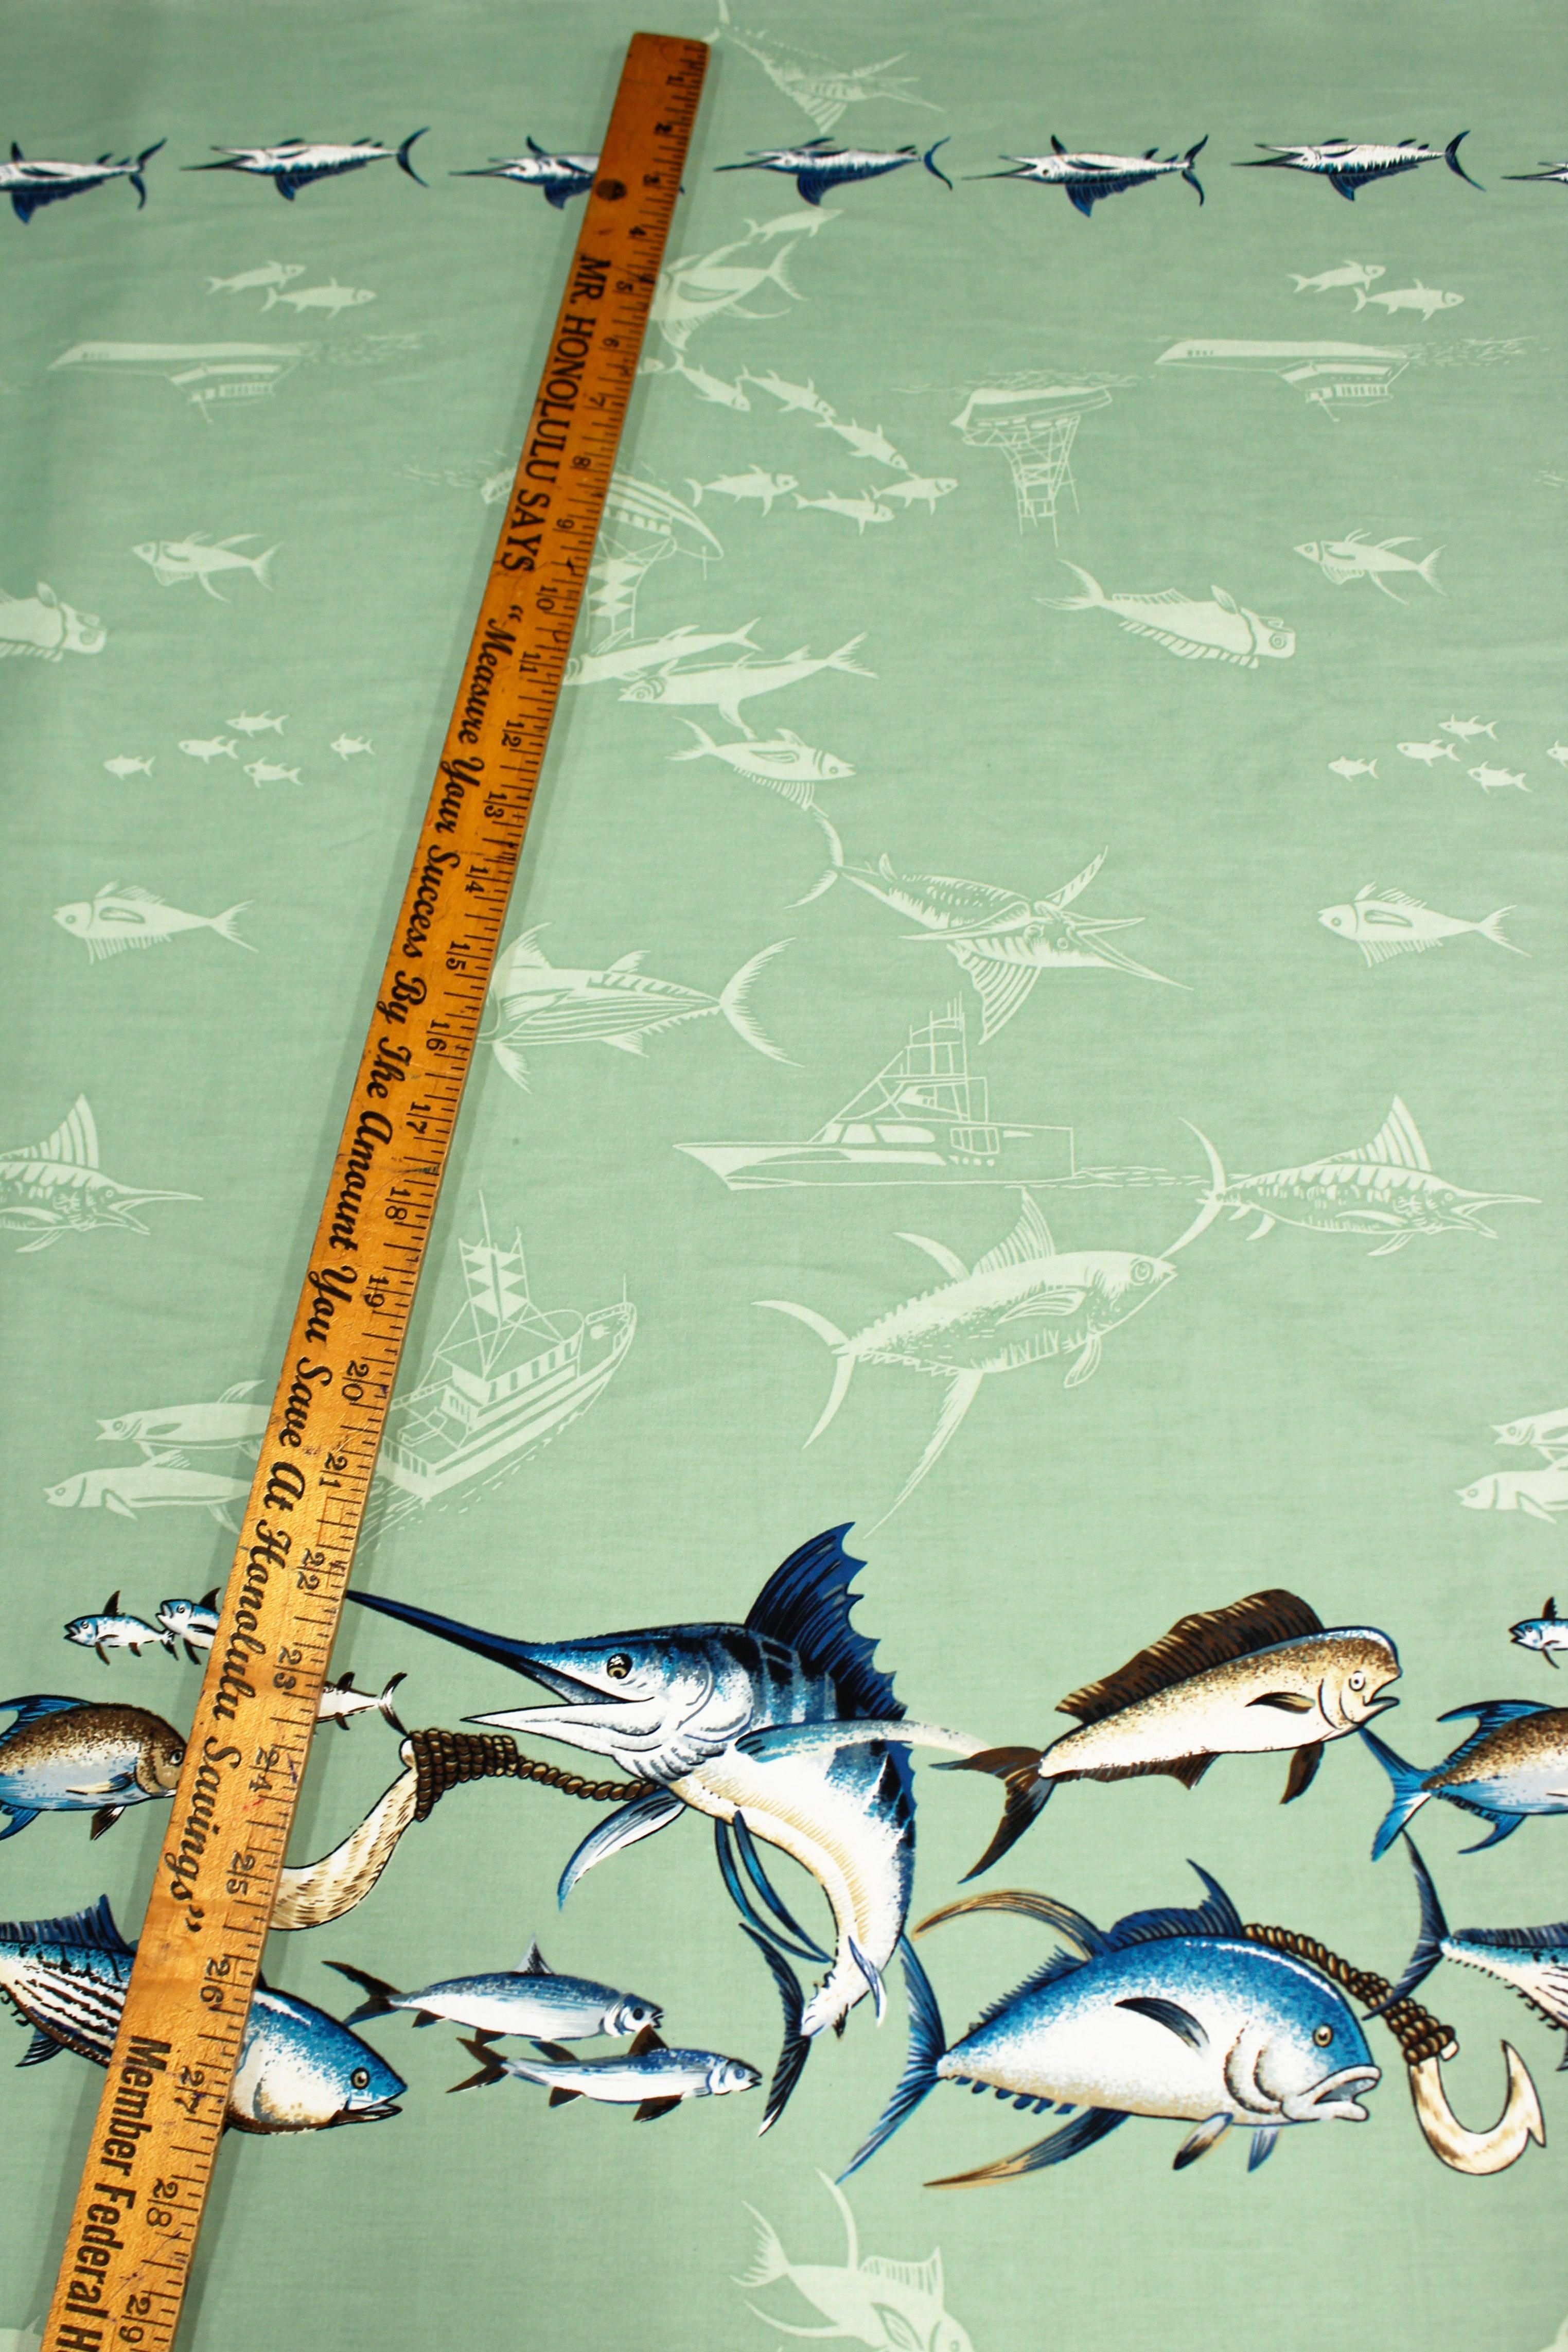 Trout On Blue Fish Activity Fabric by the yard